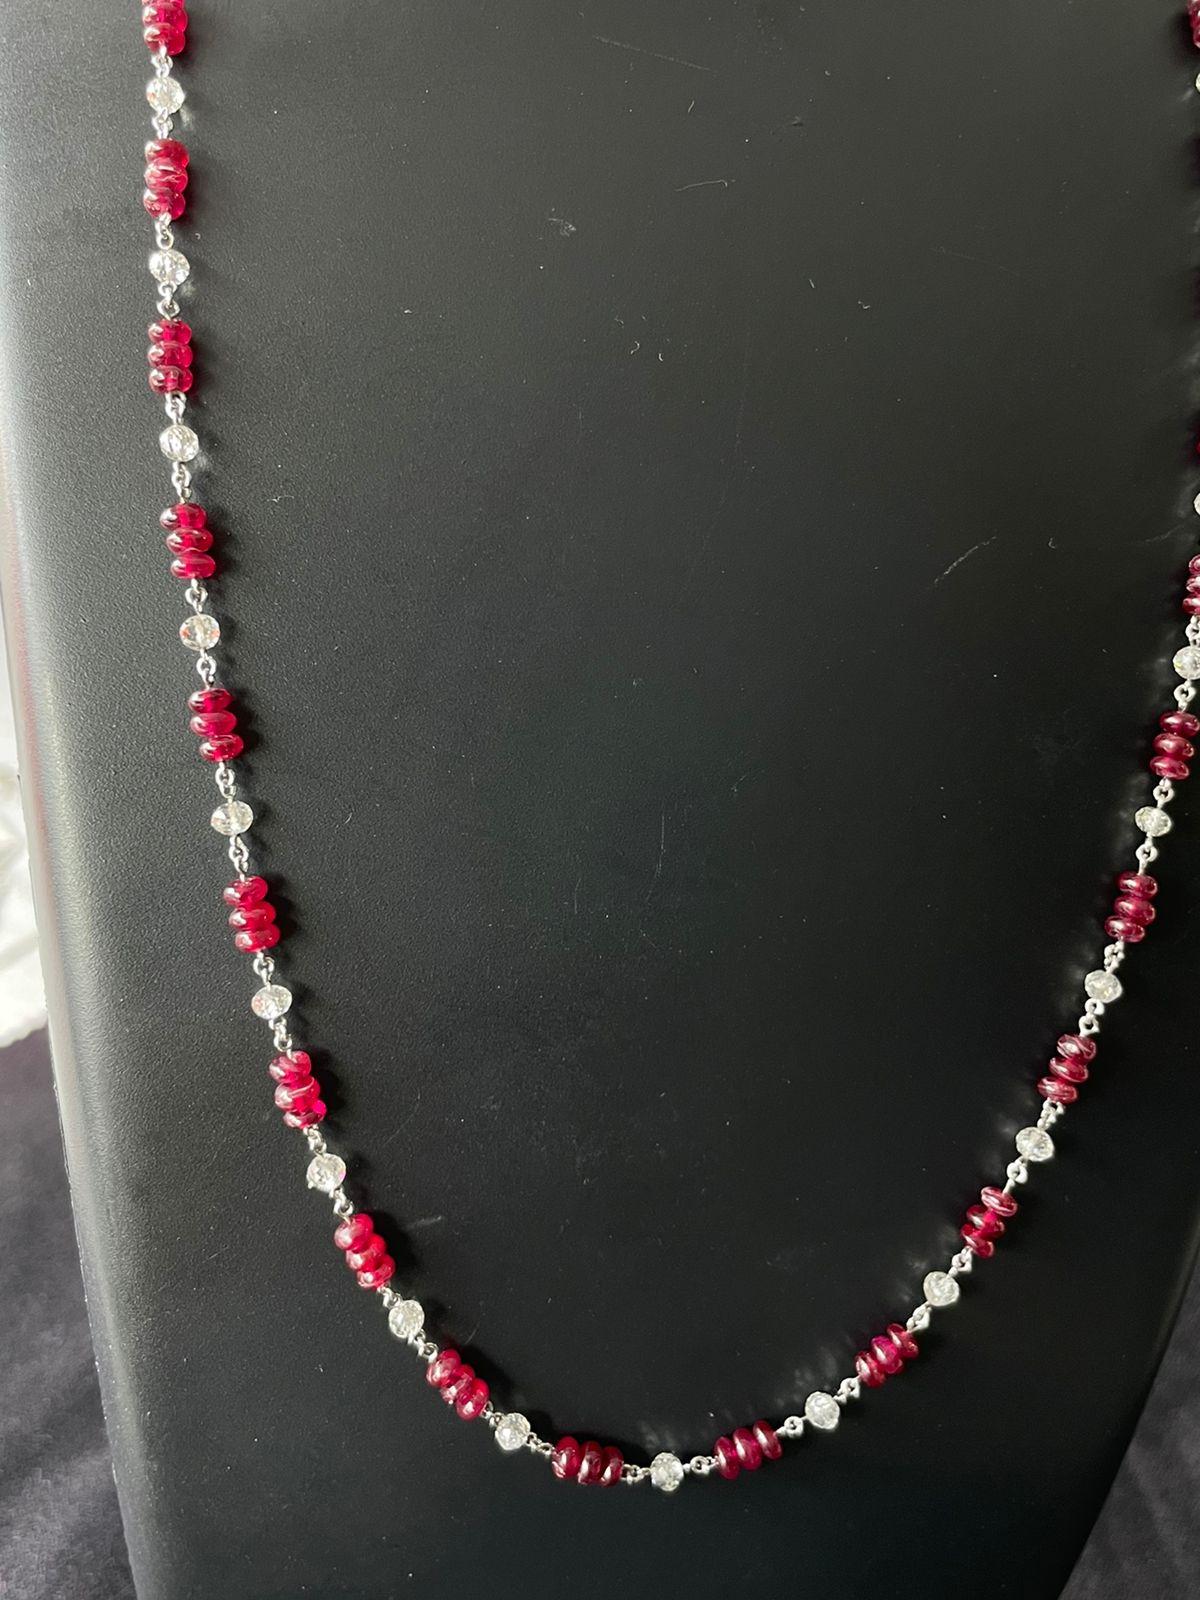 PANIM 18k White Gold Diamond Beads & Ruby Necklace

Diamond Beads & Natural Red Rubies are used to embellish a delicate necklace ,everything fluidly flowing among one another, their hues enhancing one another's. Perfect as a gift for loved ones and